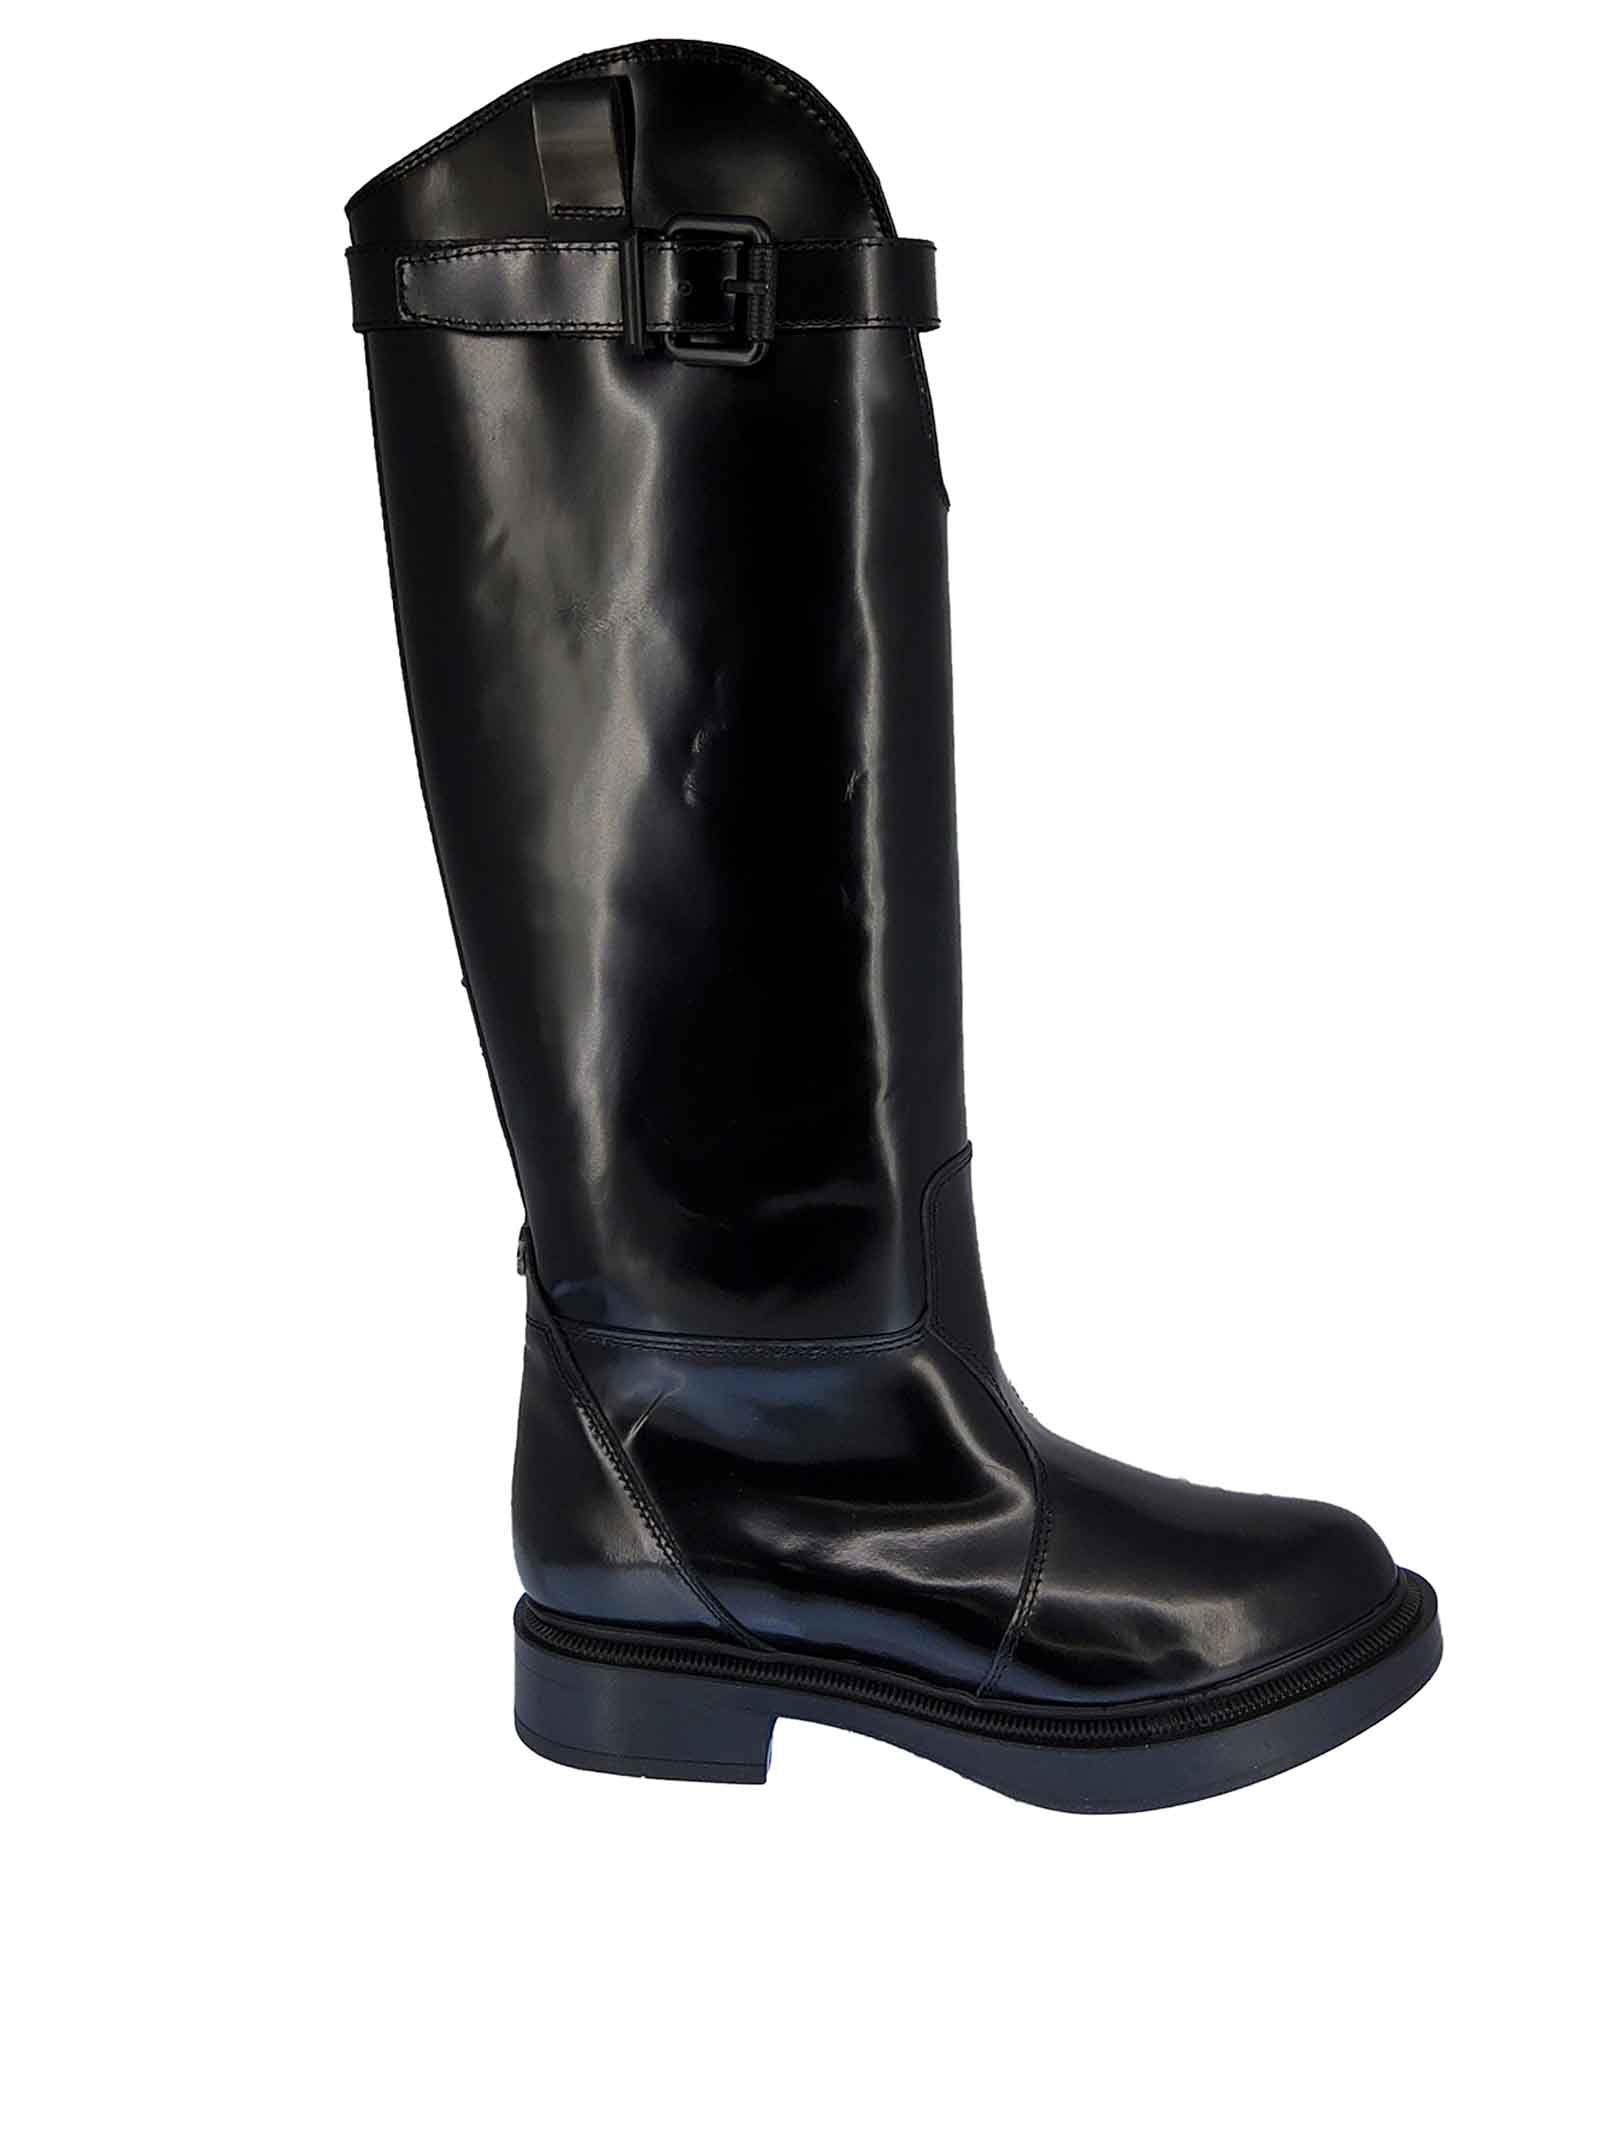 Women's Footwear Riding Boots in Shiny Black Leather with Matching Rubber Strap and Bottom